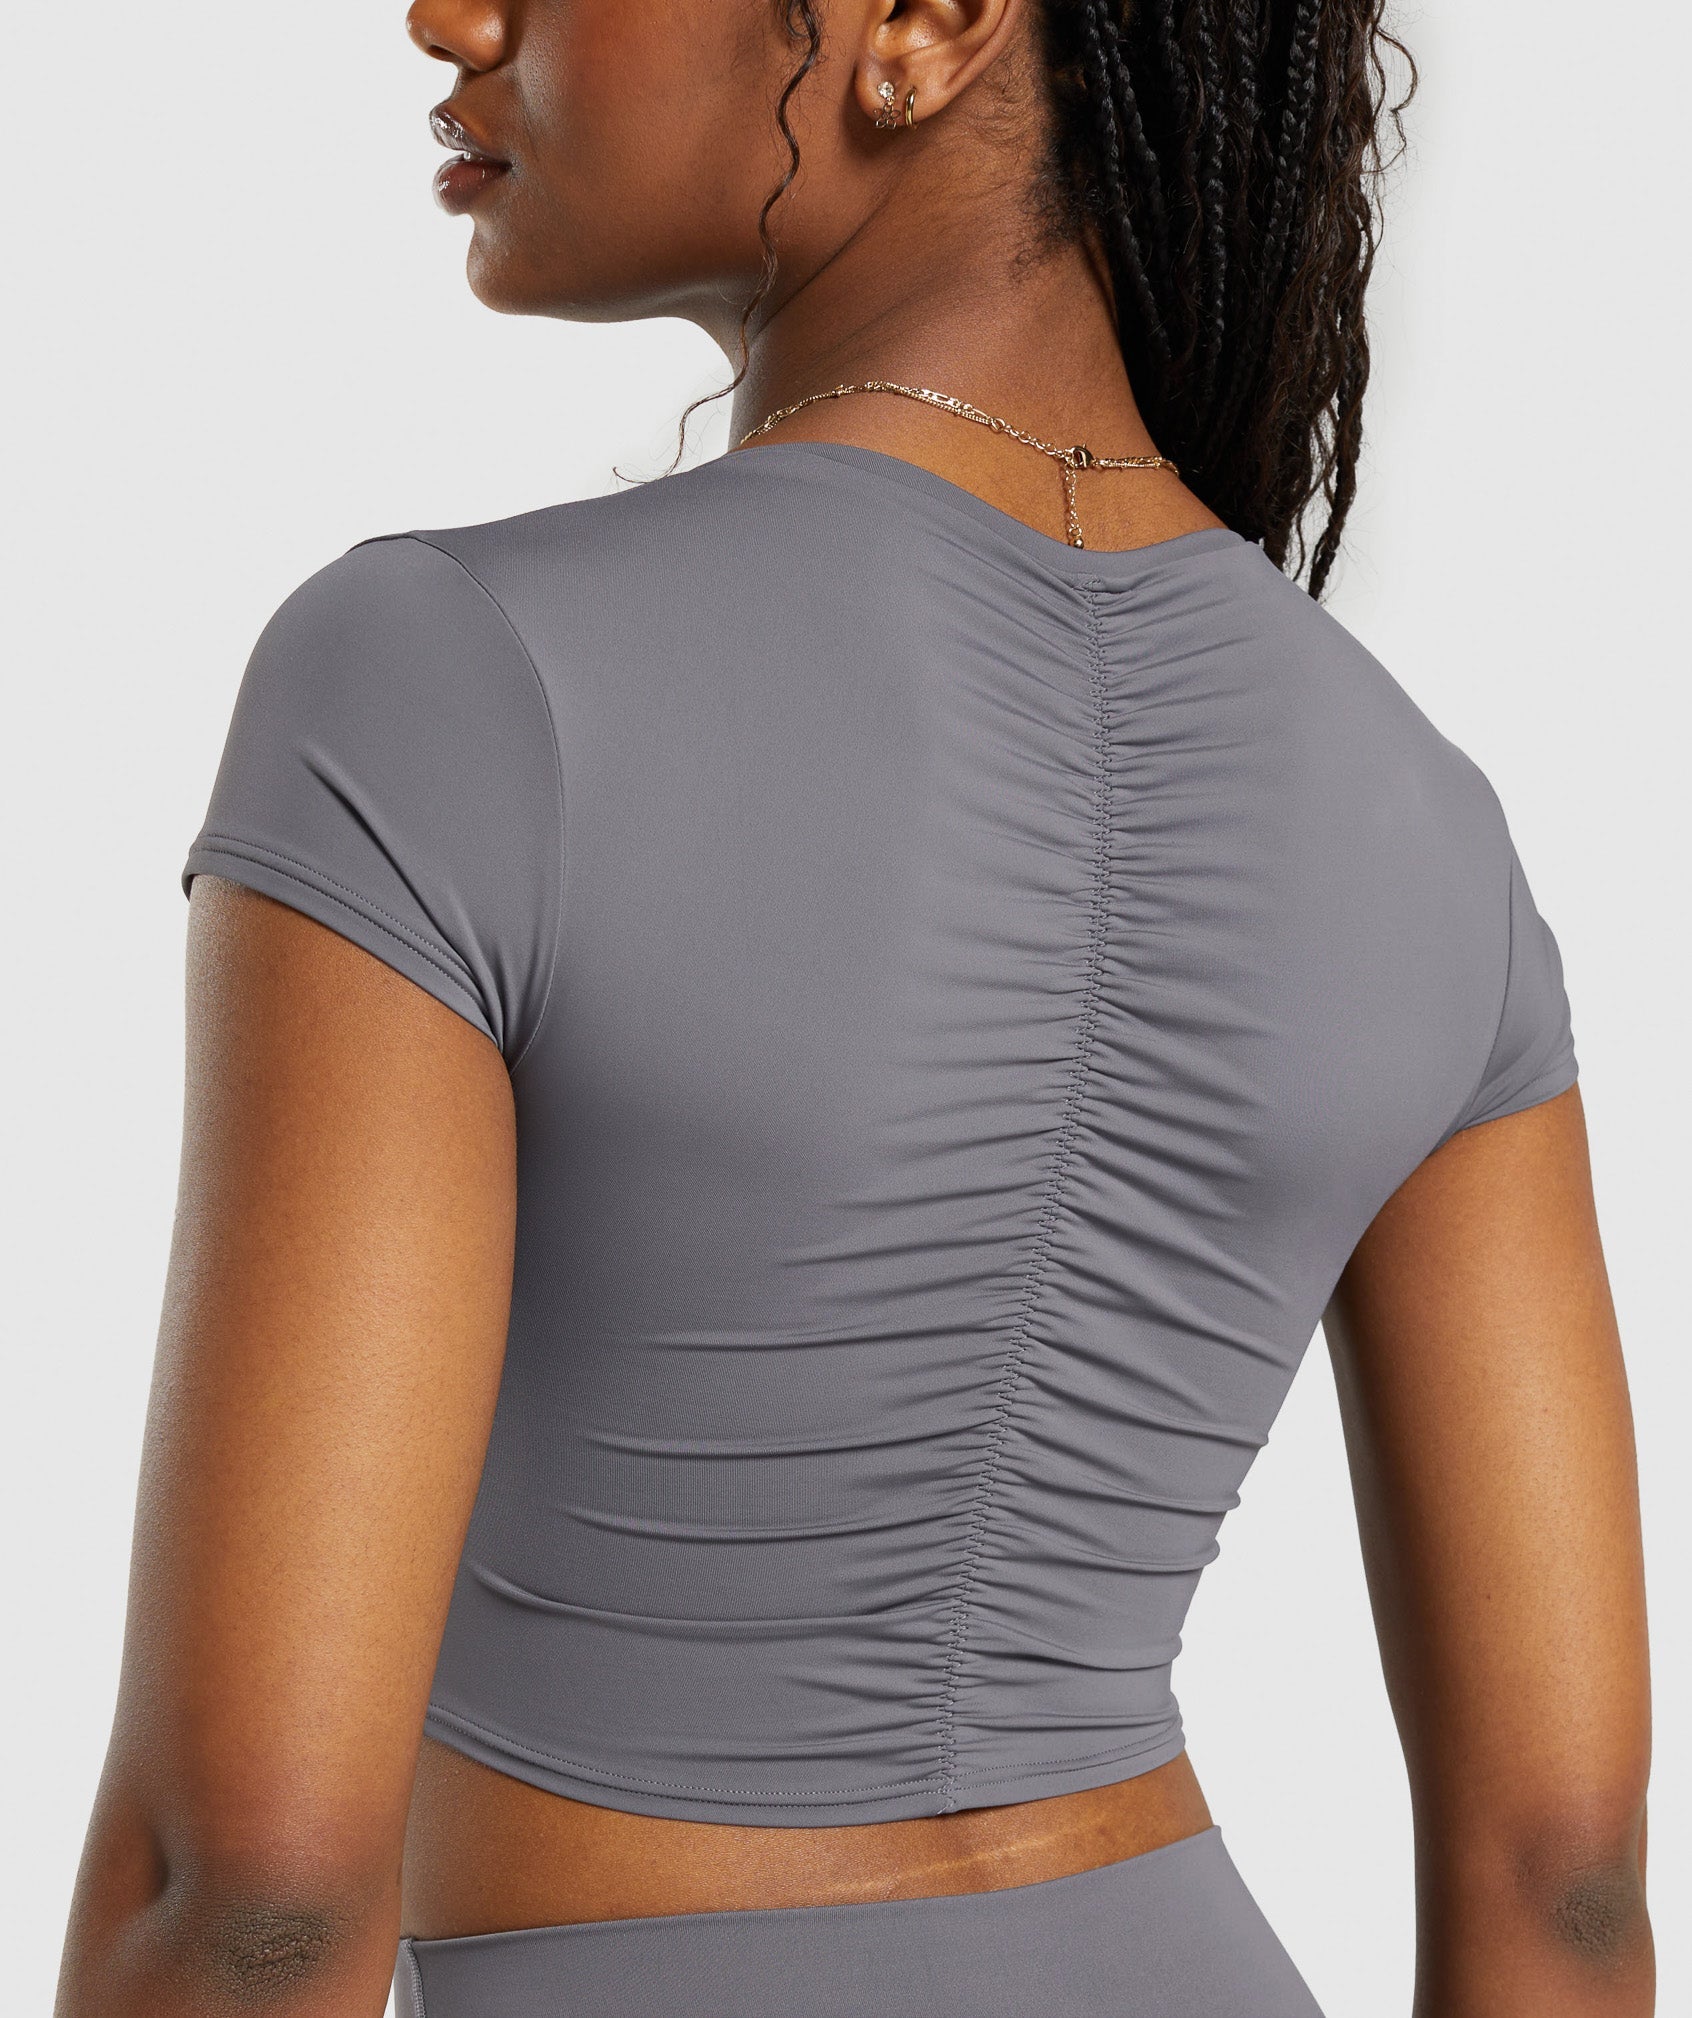 Elevate Ruched Crop Top in Brushed Grey - view 5